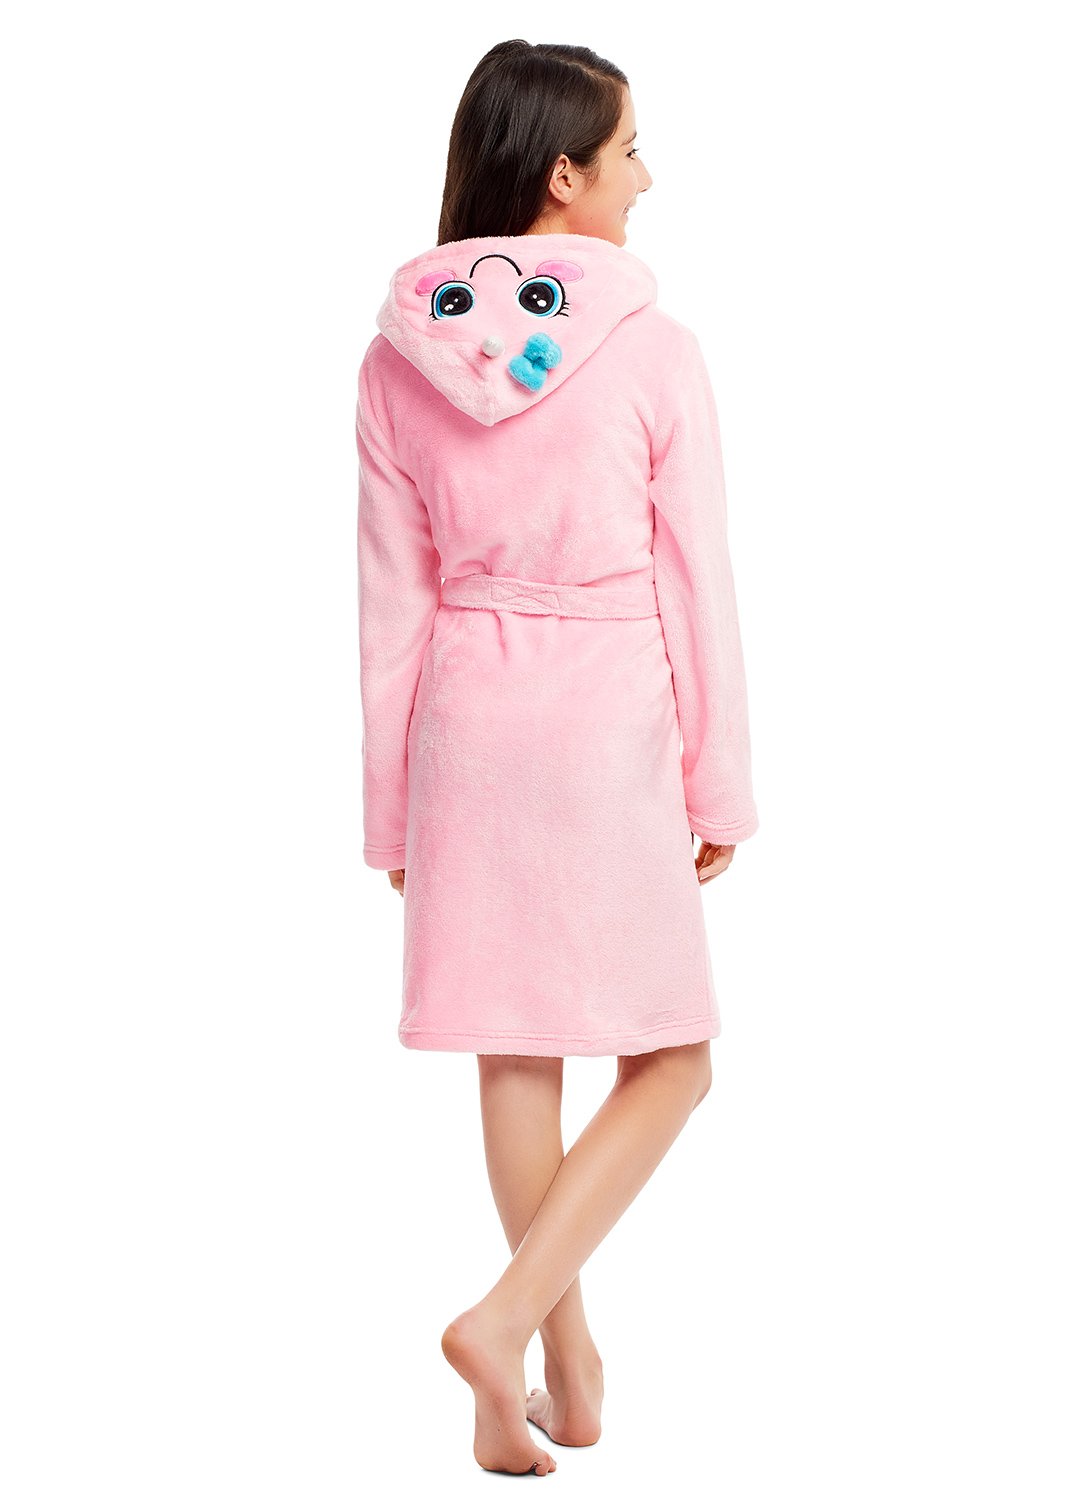 Back view Girl wearing Pink Narwhal Robe